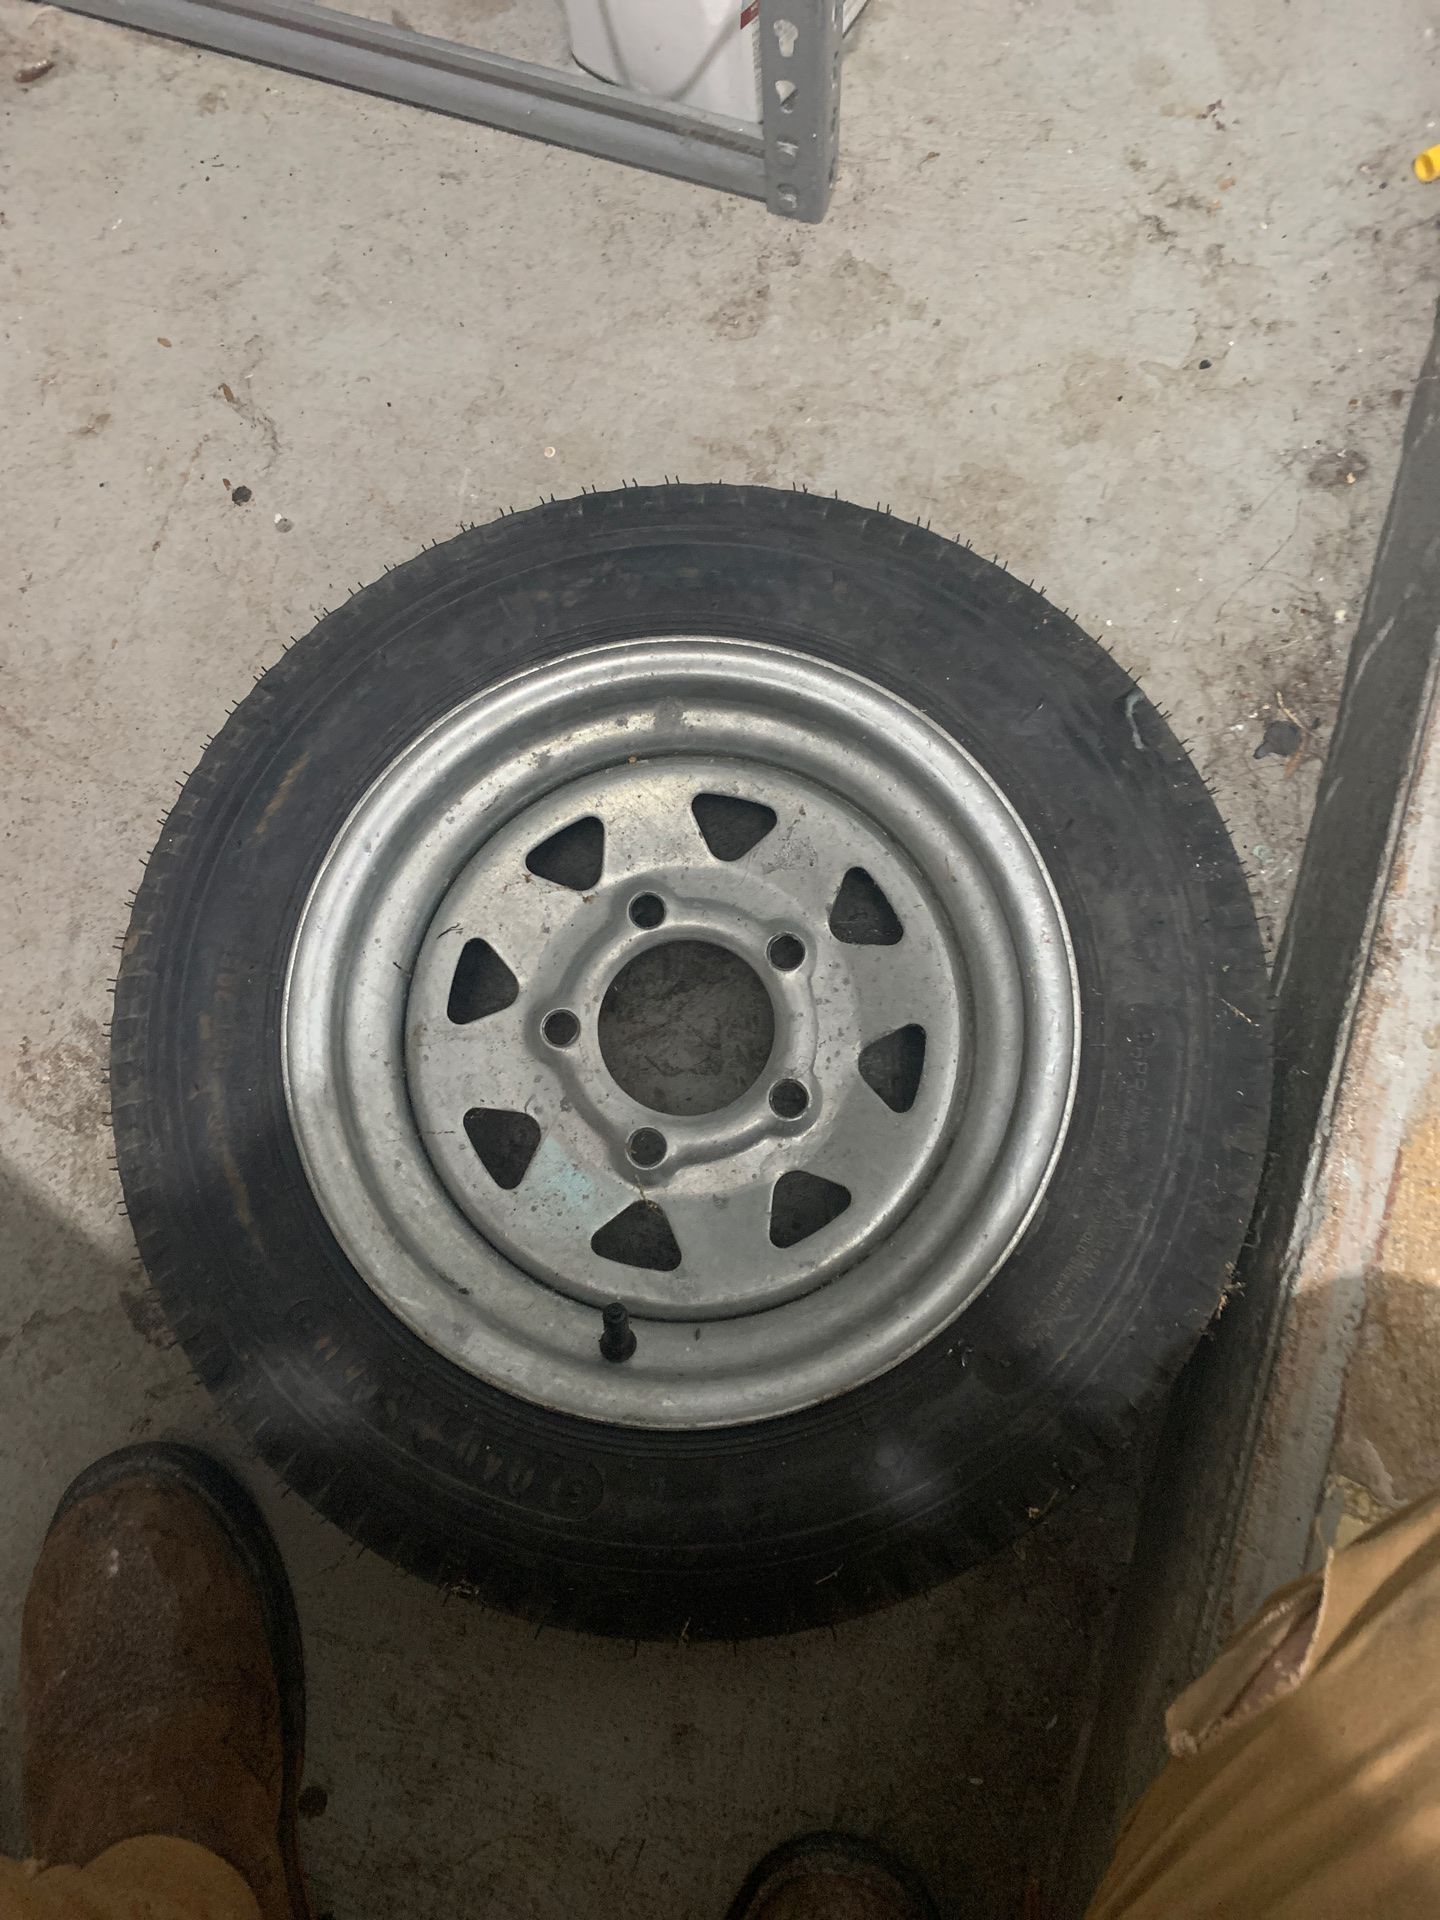 Trailer tire new and wheel